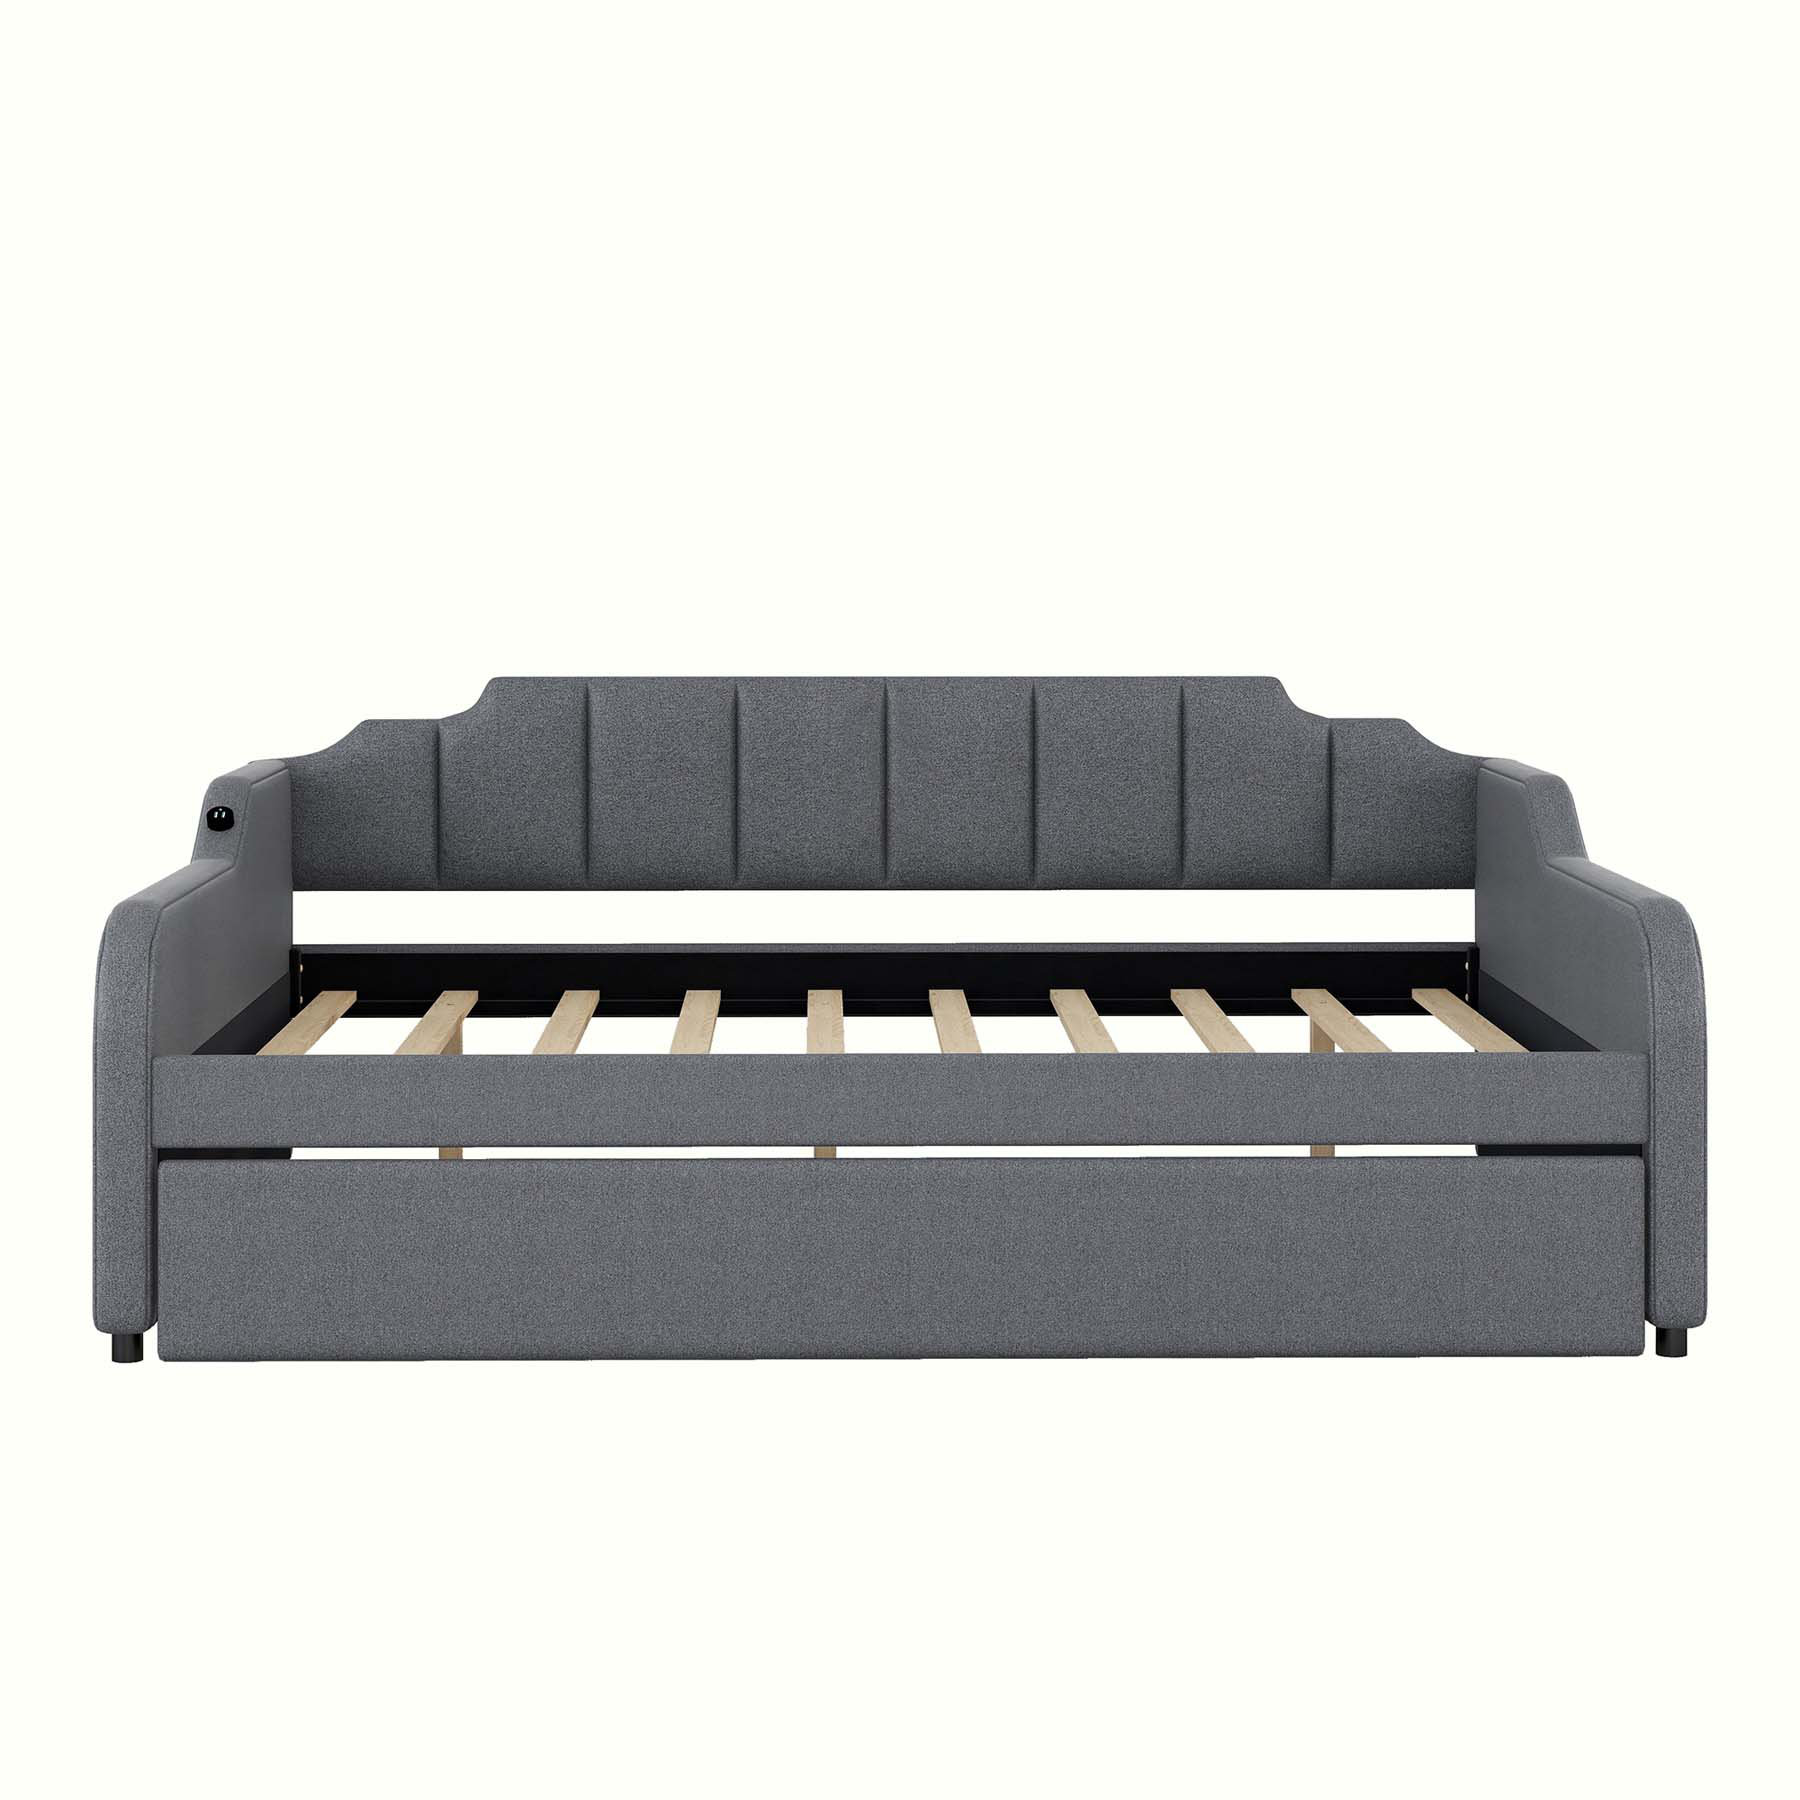 Wildon Home® Bardoux Upholstered Daybed with Trundle | Wayfair